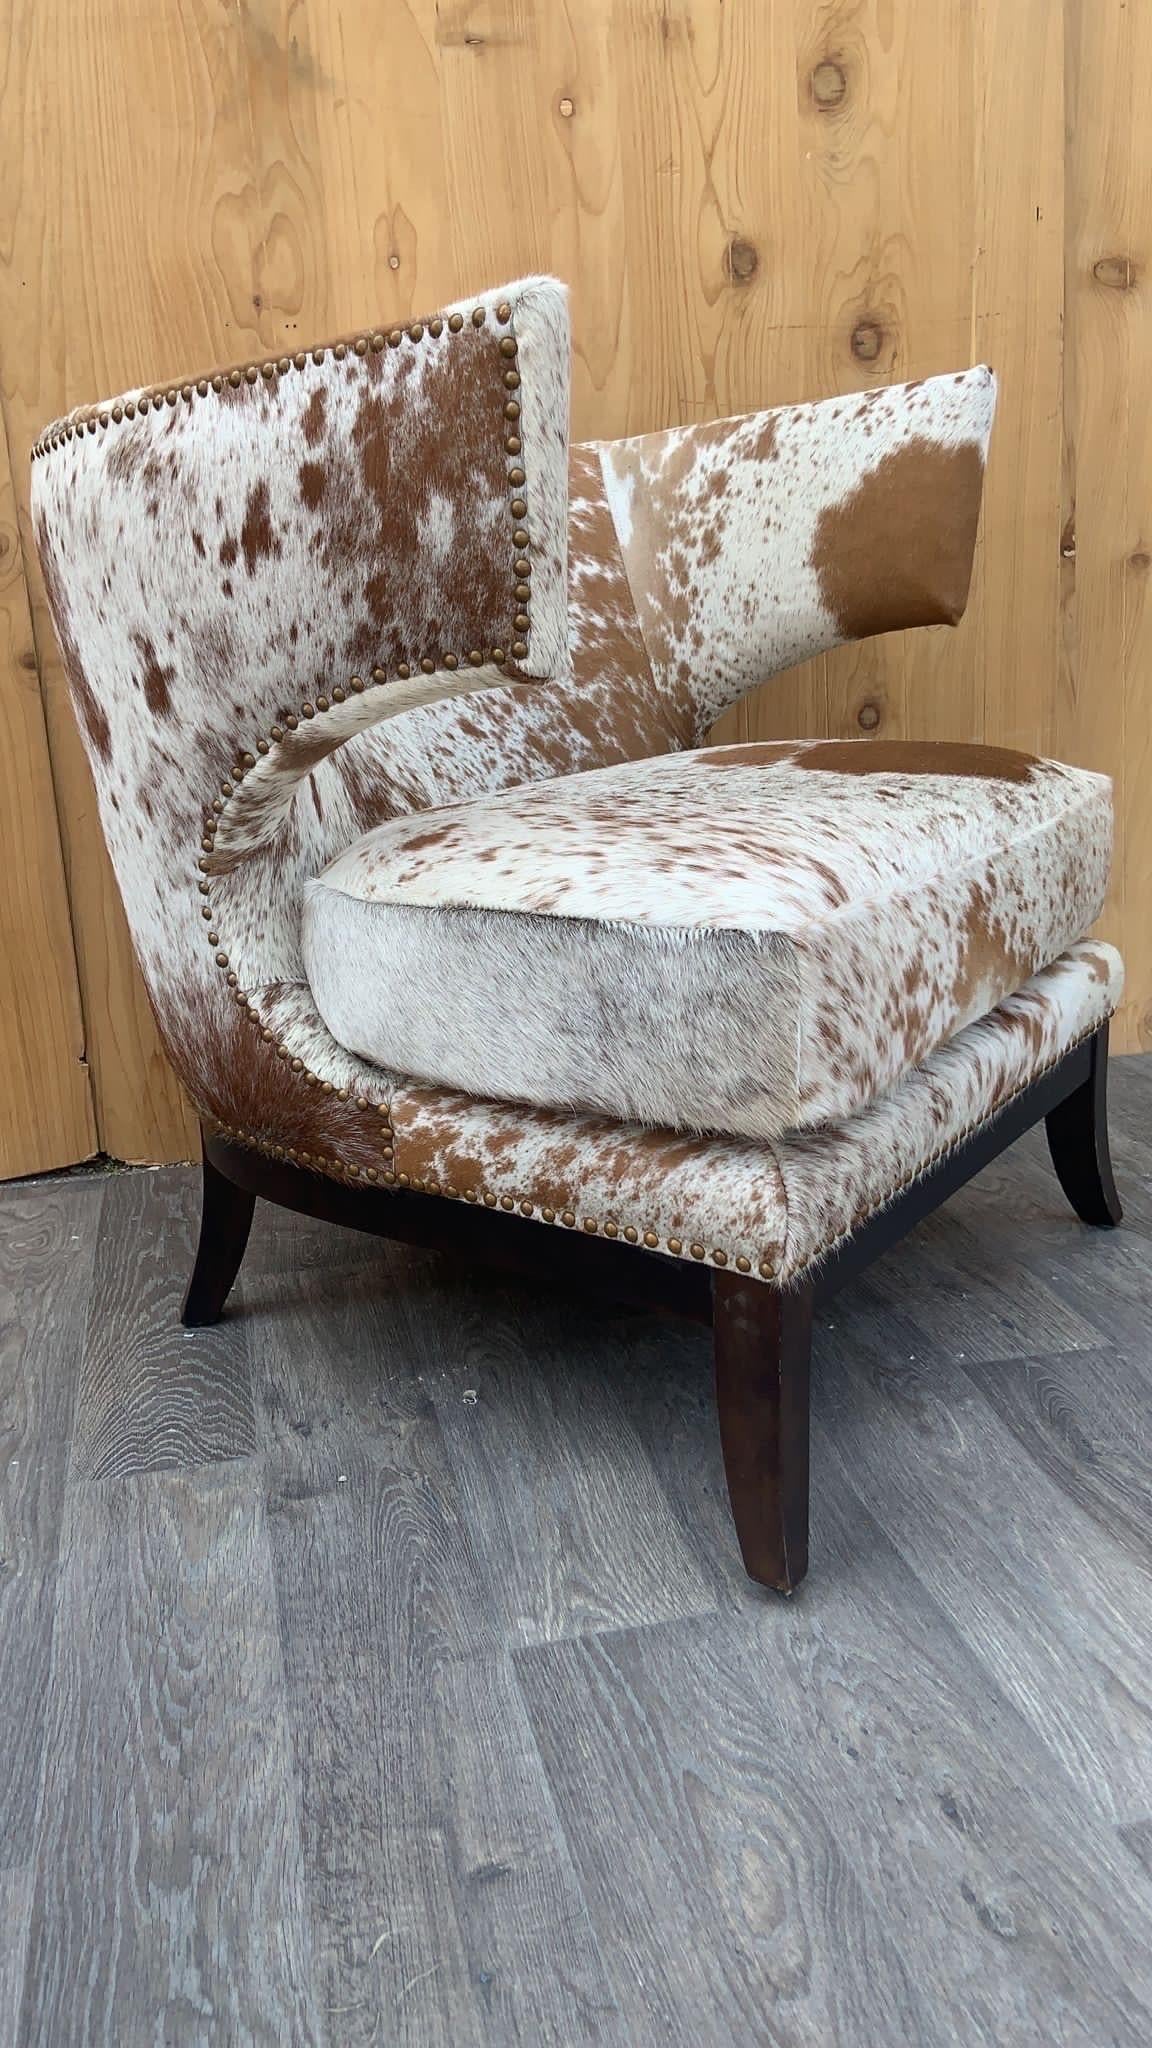 English Horseshoe Savoy Chairs Newly Upholstered in Brazilian Cowhide - Set of 2 4